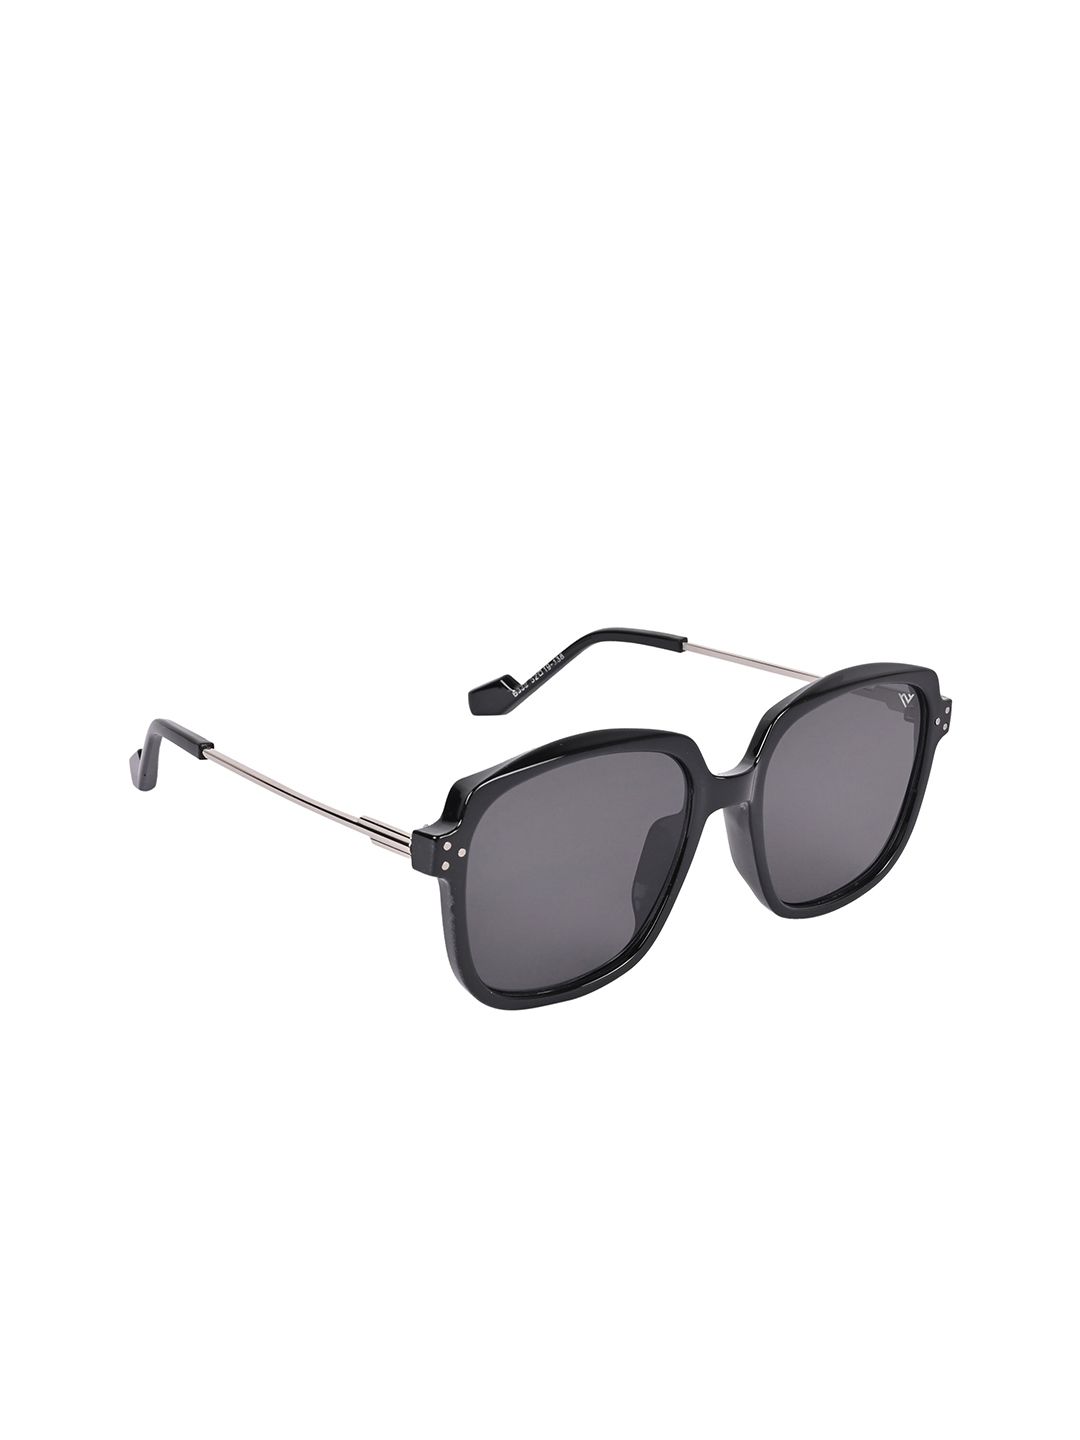 Voyage Unisex Black Lens & Black Square Sunglasses with UV Protected Lens Price in India